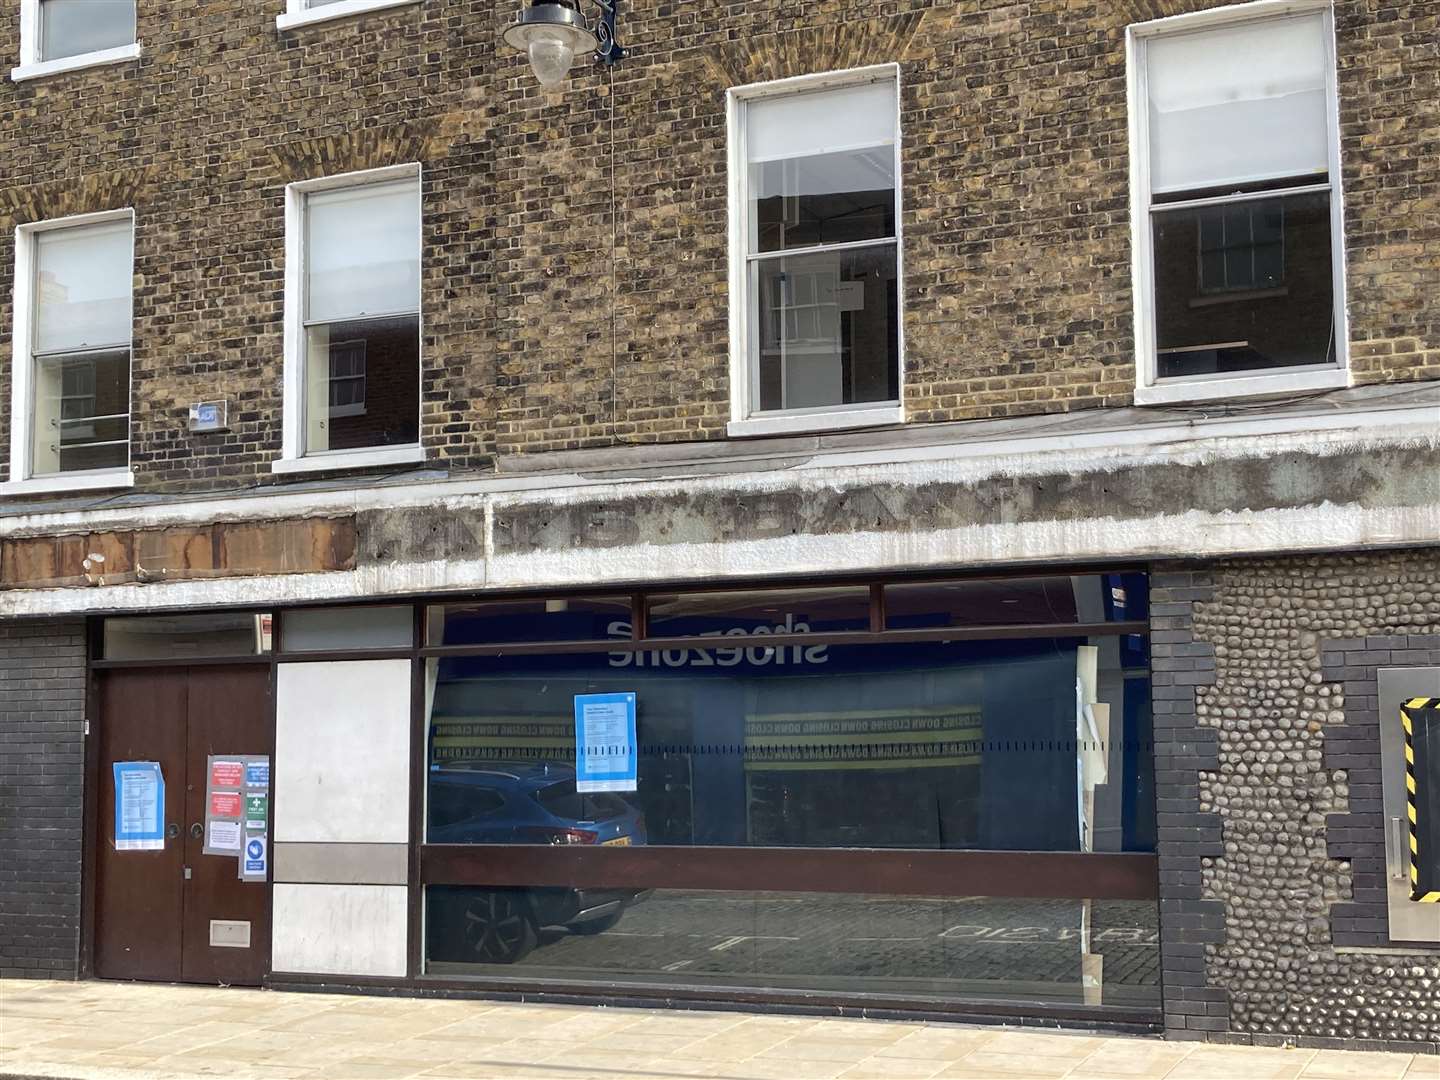 Sign of the times - gone. Barclays Bank has closed its branch in Sheerness Broadway. The bank's name has been removed and the cashpoint has been covered up